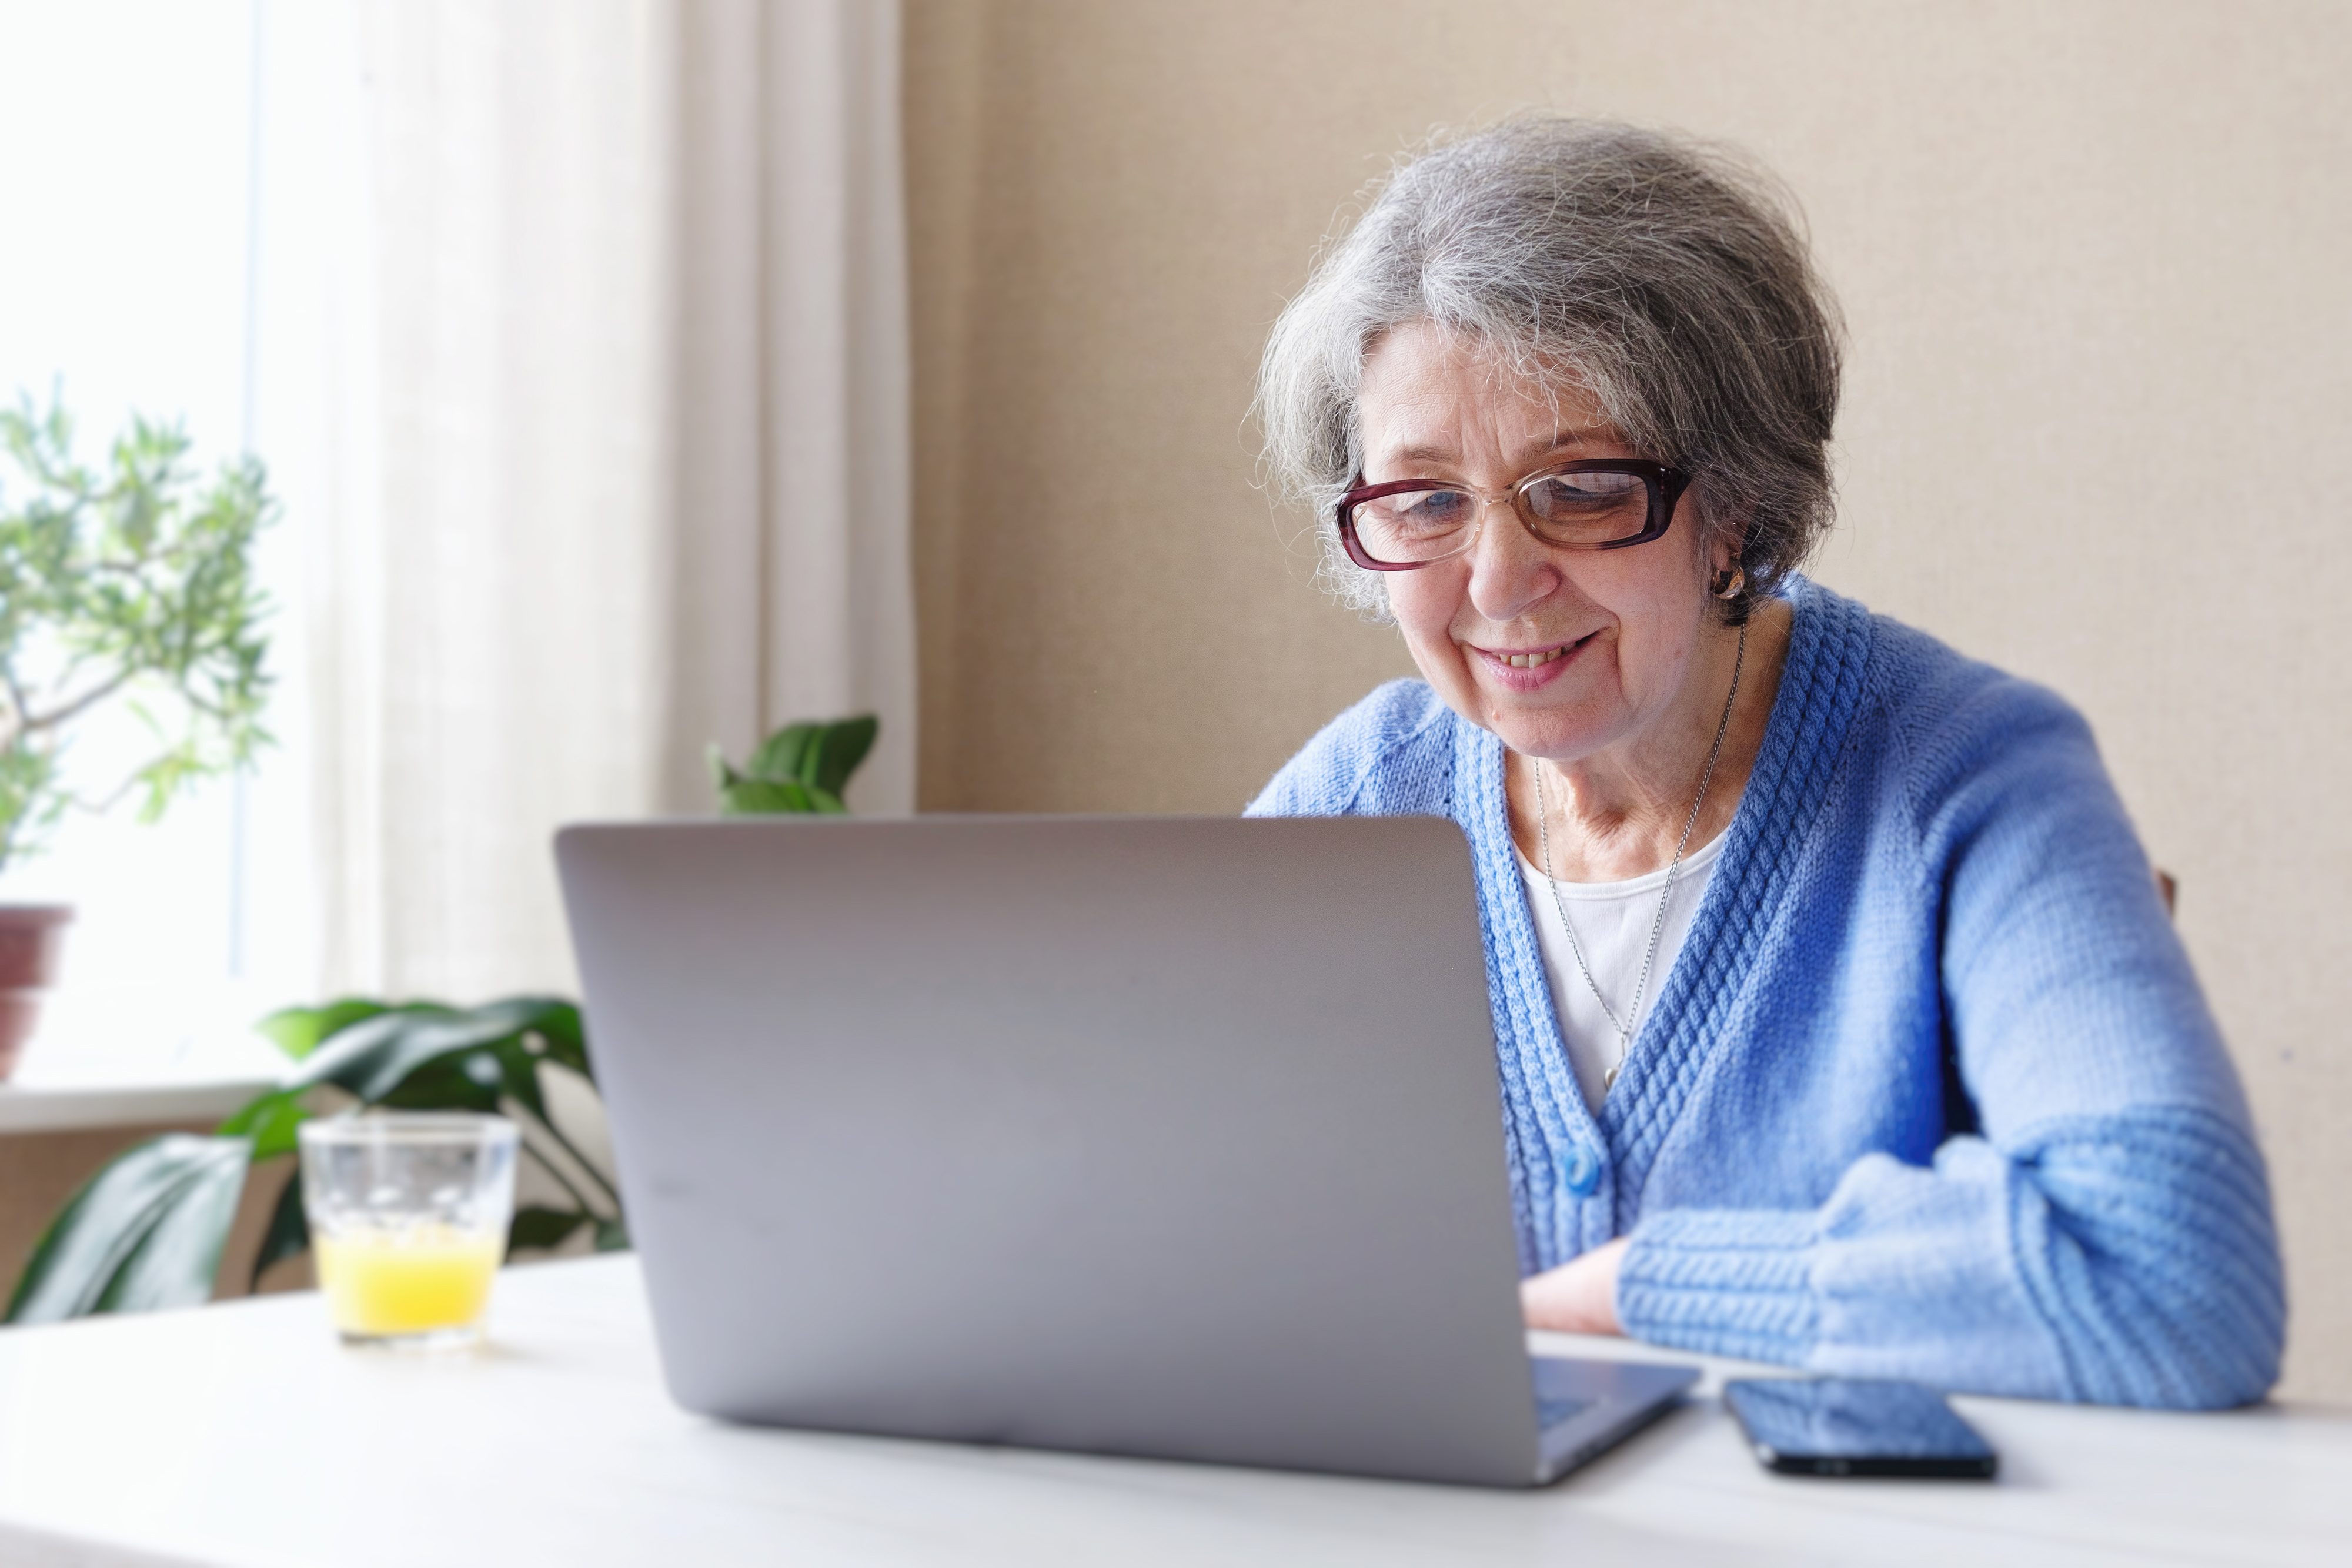 Disparities in Broadband Internet Use for Older Adults